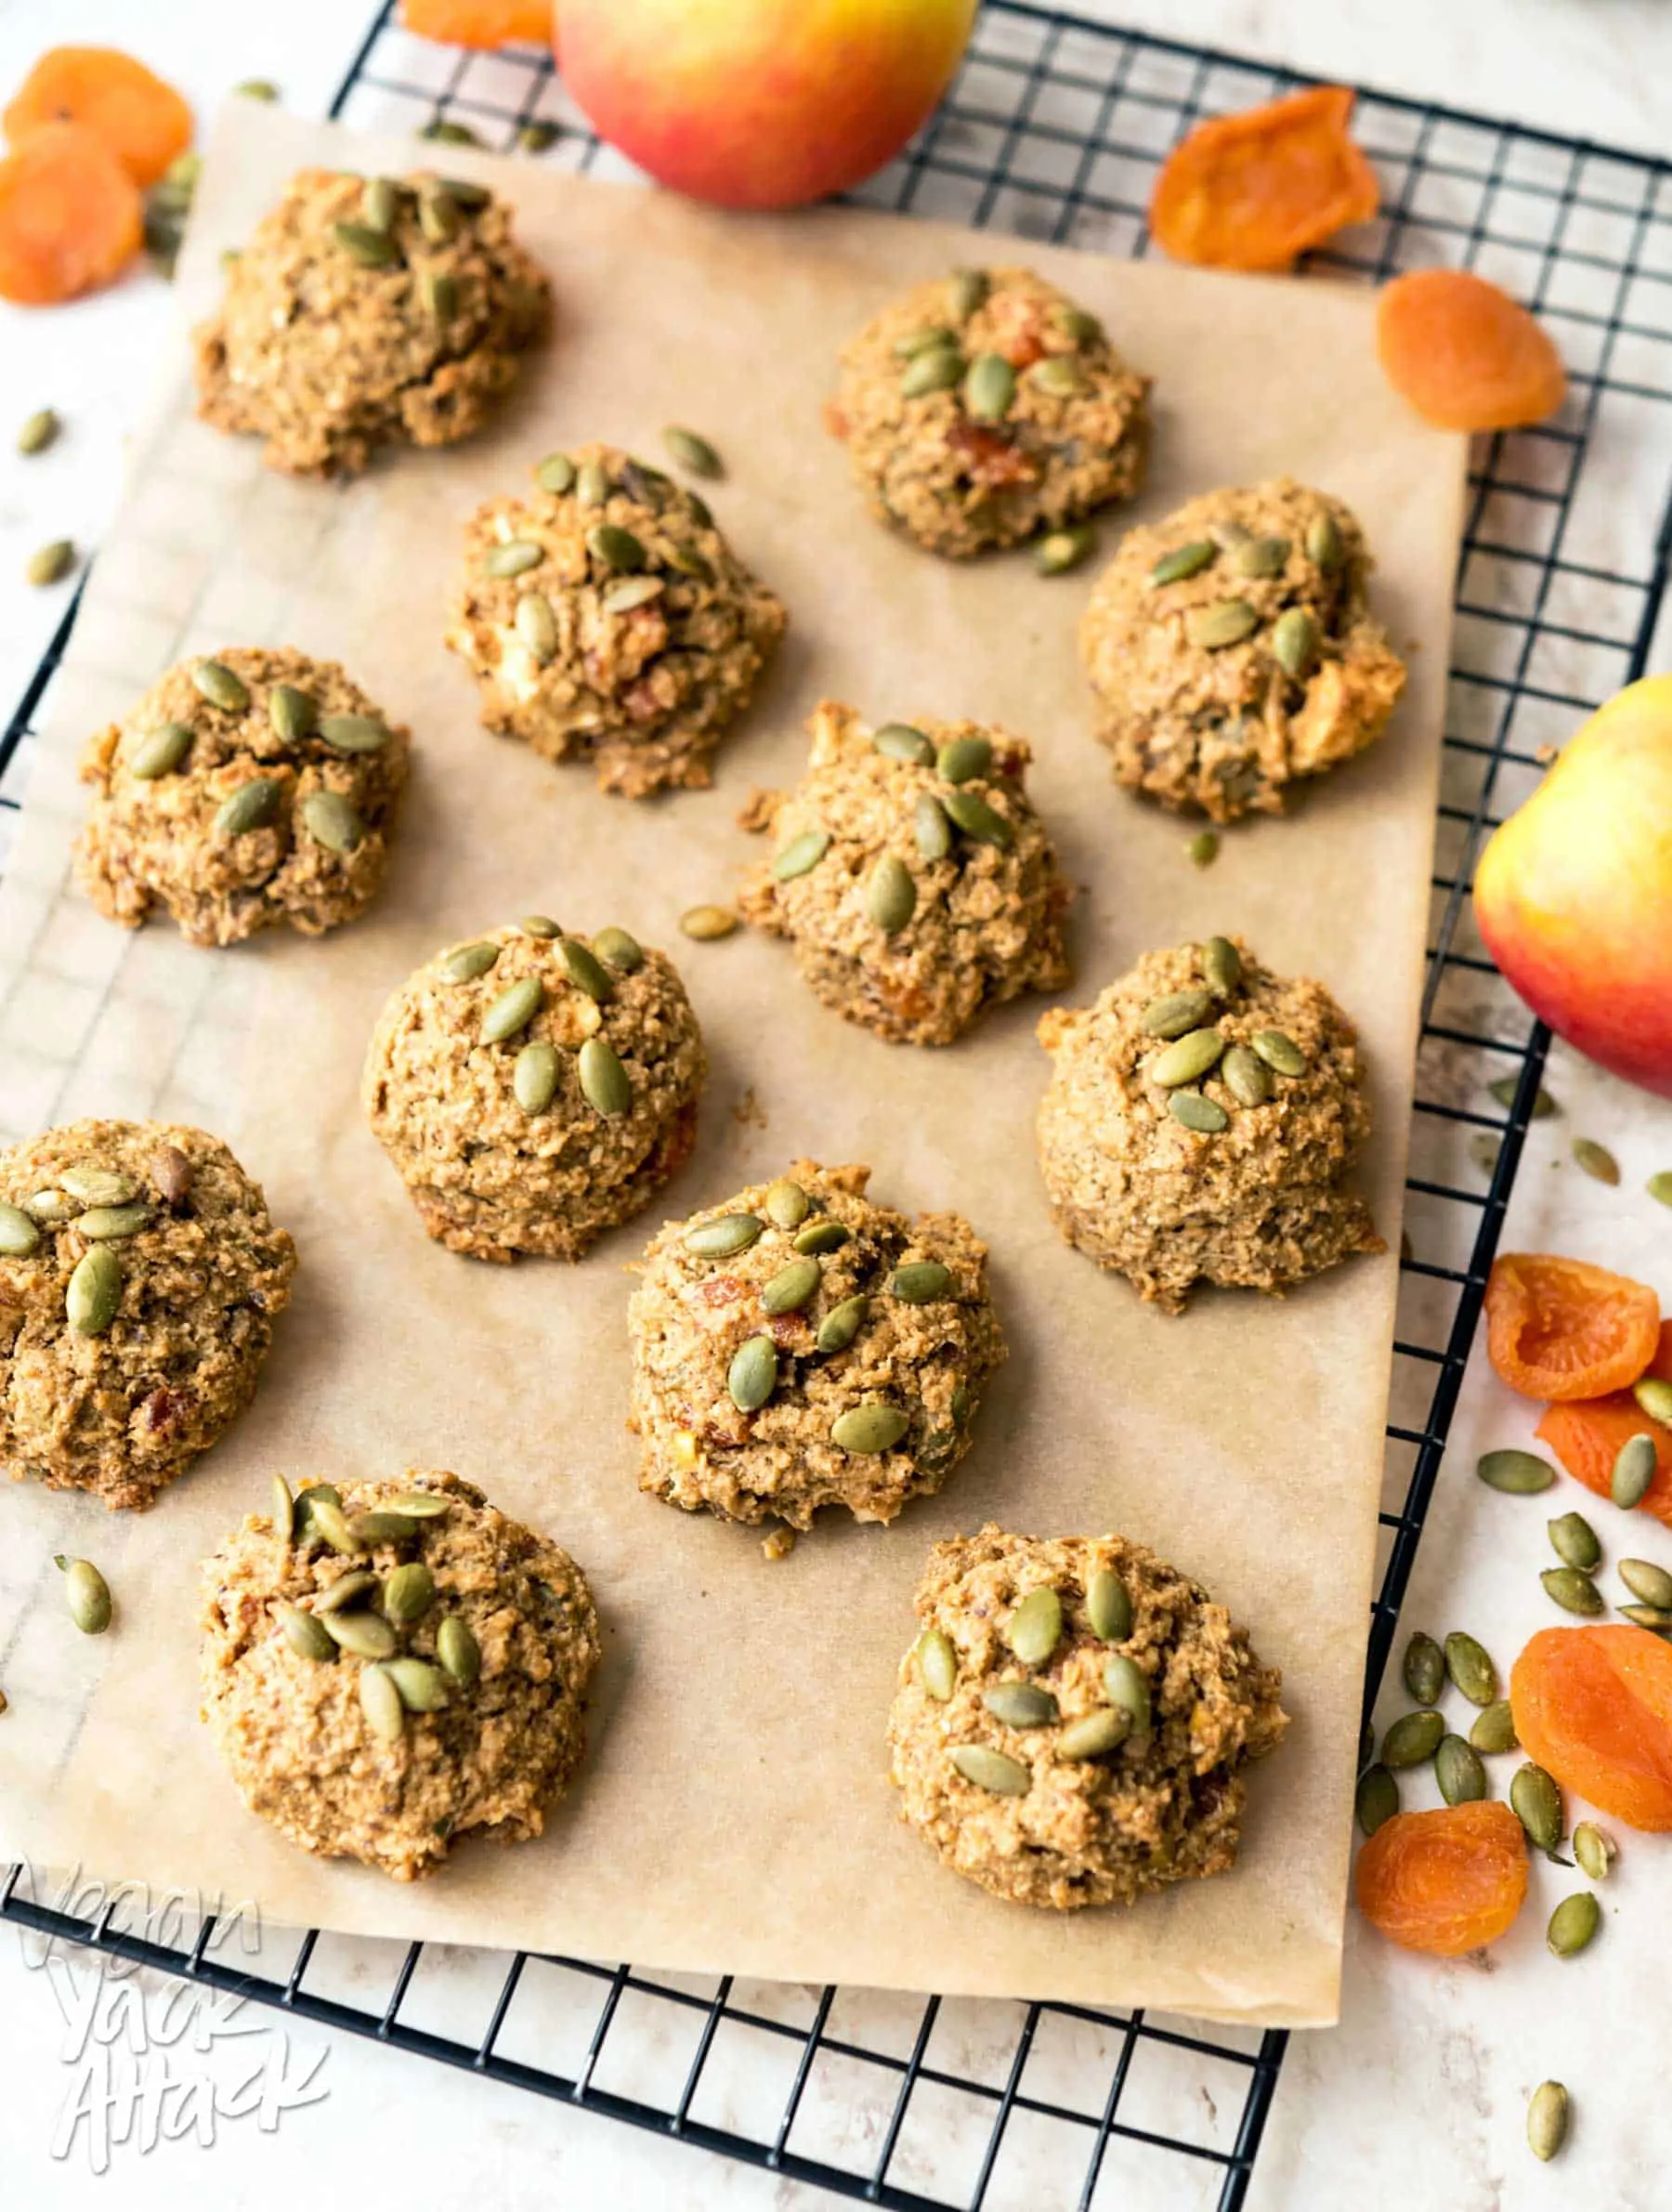 These Apple Apricot Quinoa Cookies are filled with fruity goodness and make great snacks! Made with whole grains and quinoa flakes, to keep you satiated.